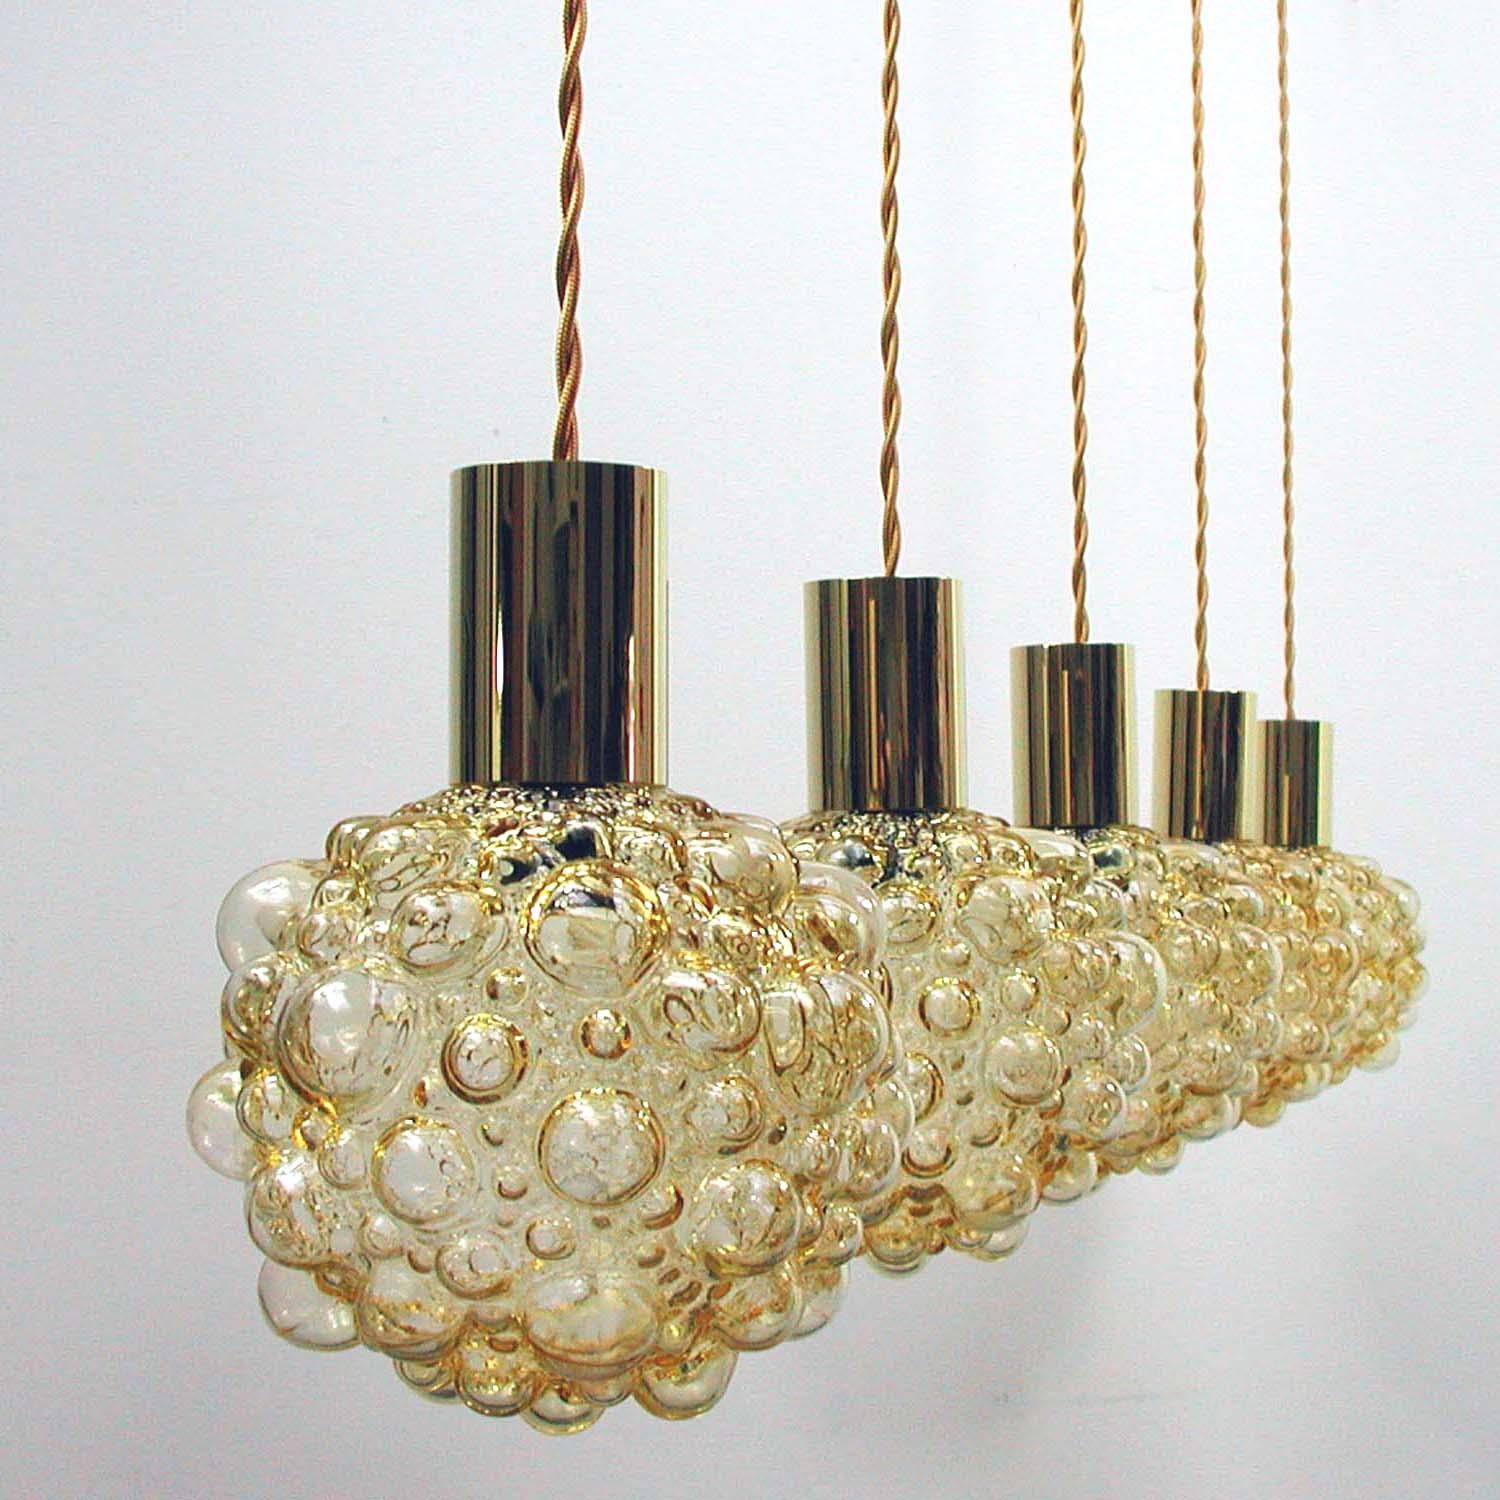 This Space Age pendant light was manufactured and designed during the 1960s in Germany. It is made of amber bubble glass and has got a brass cylinder. The lamp comes without canopy.

The lamp has been rewired with new amber colored fabric cord. It